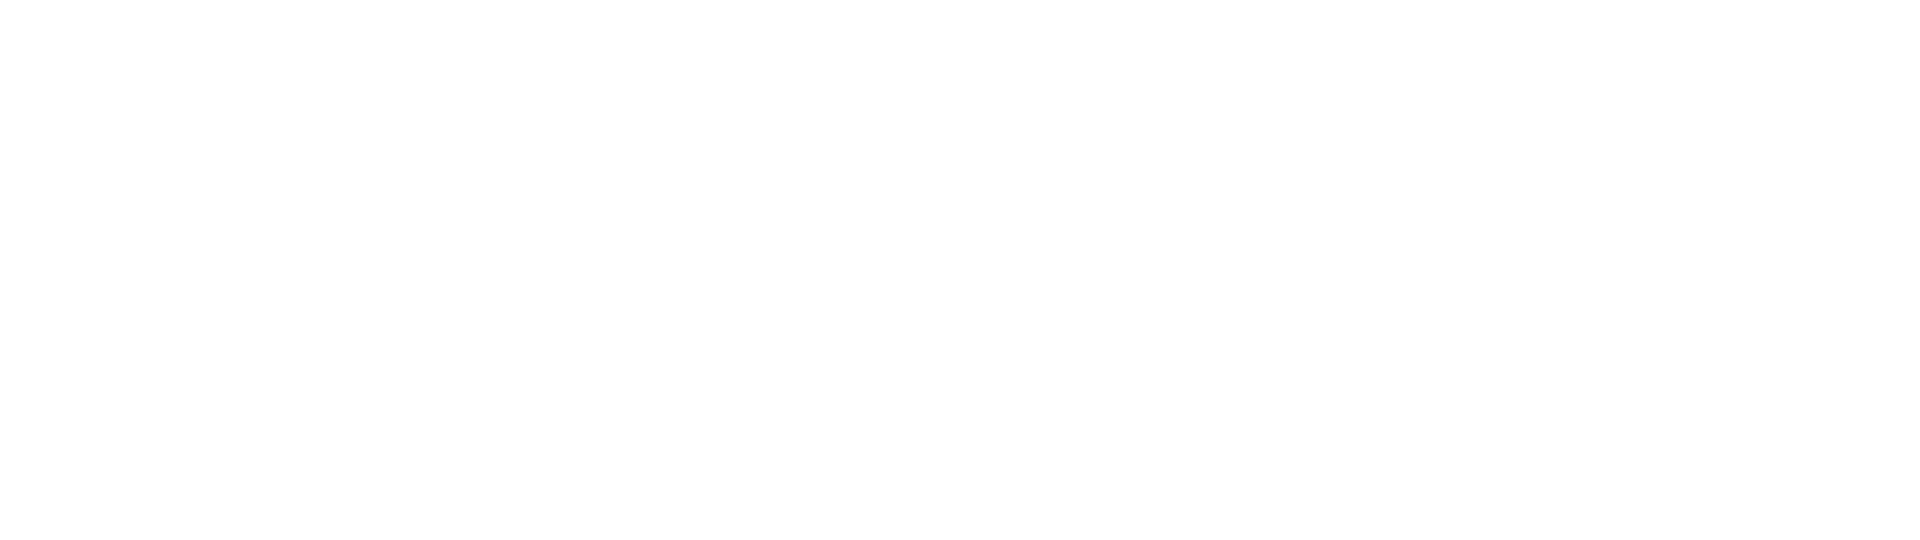 Where miracles happen